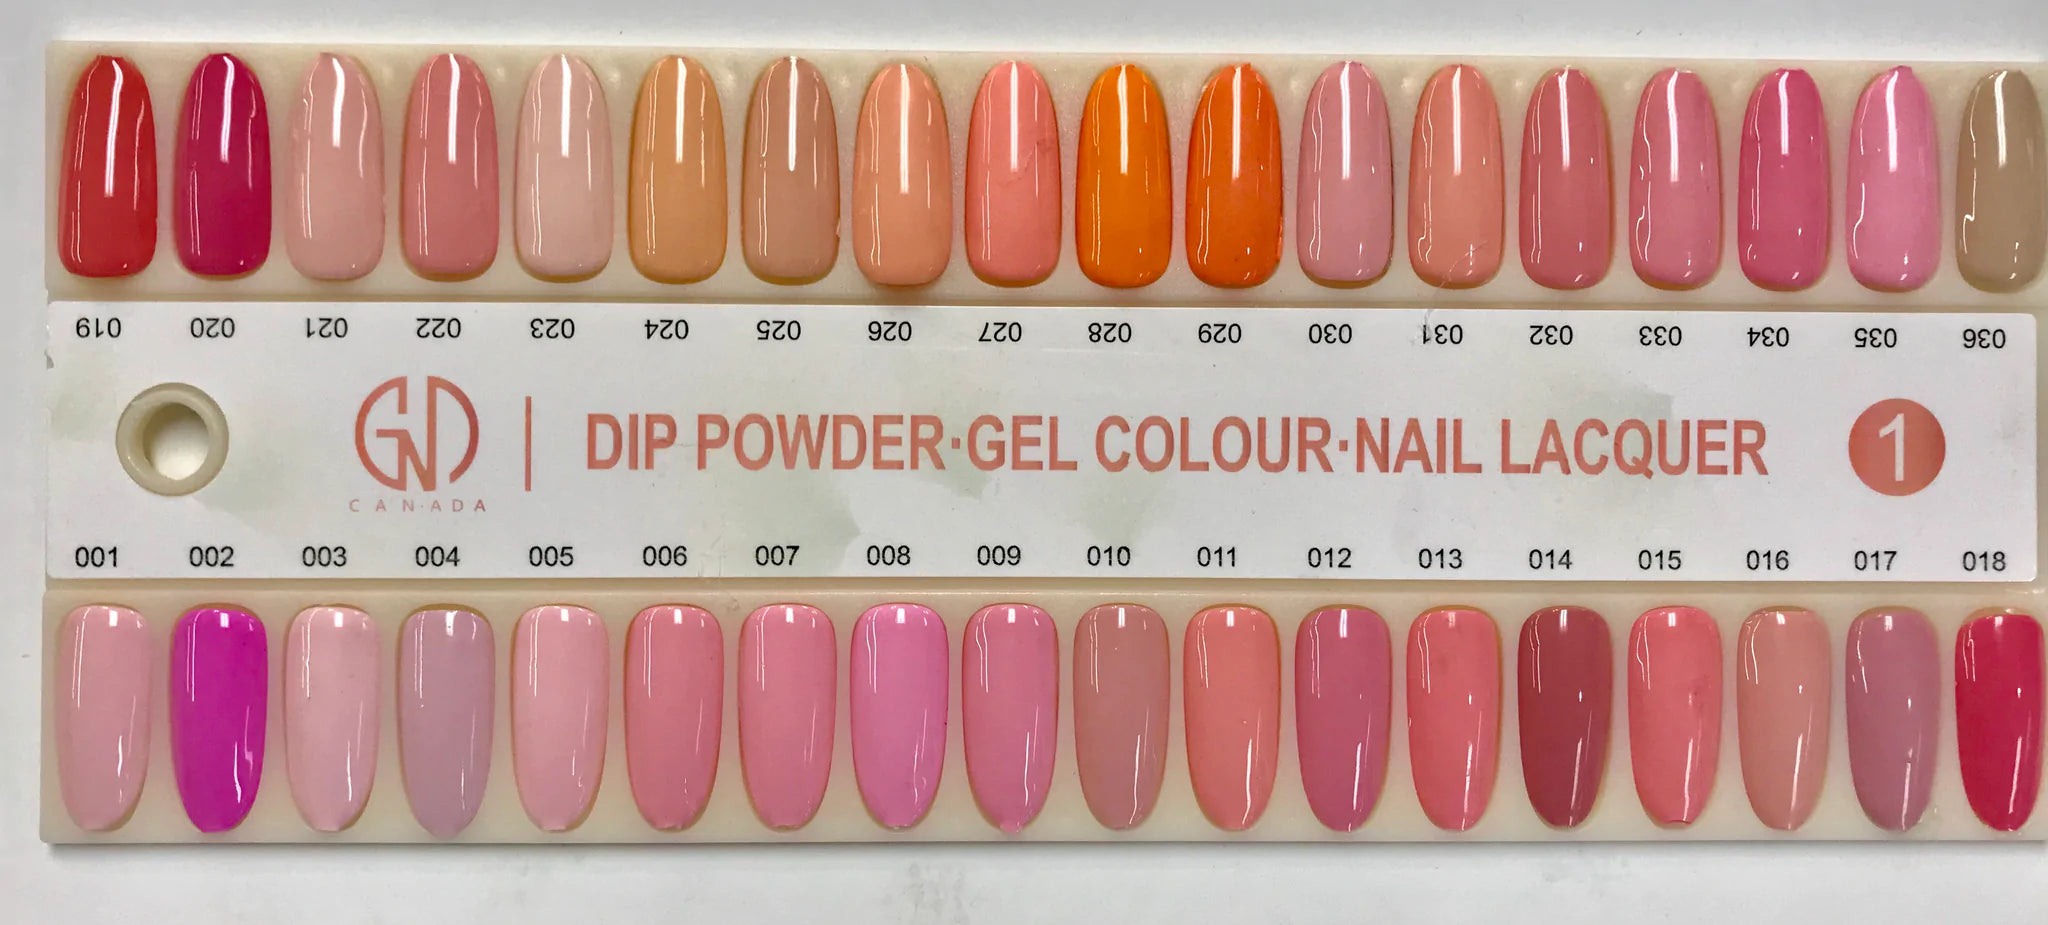 GND Duo Gel & Lacquer 019